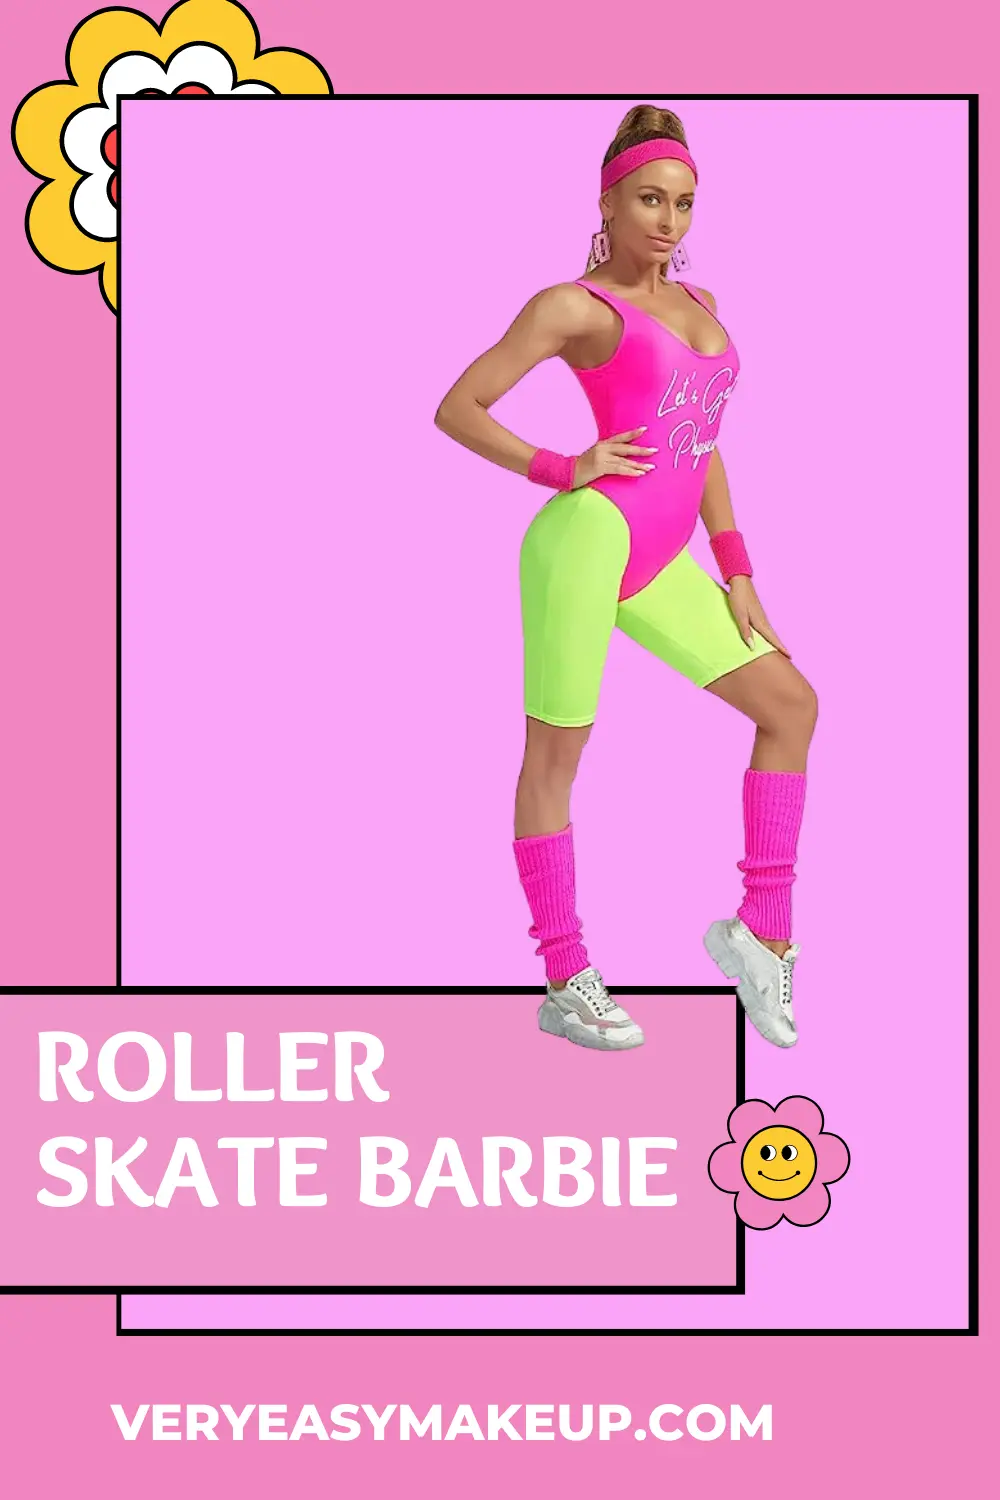 Roller Skate Barbie outfit